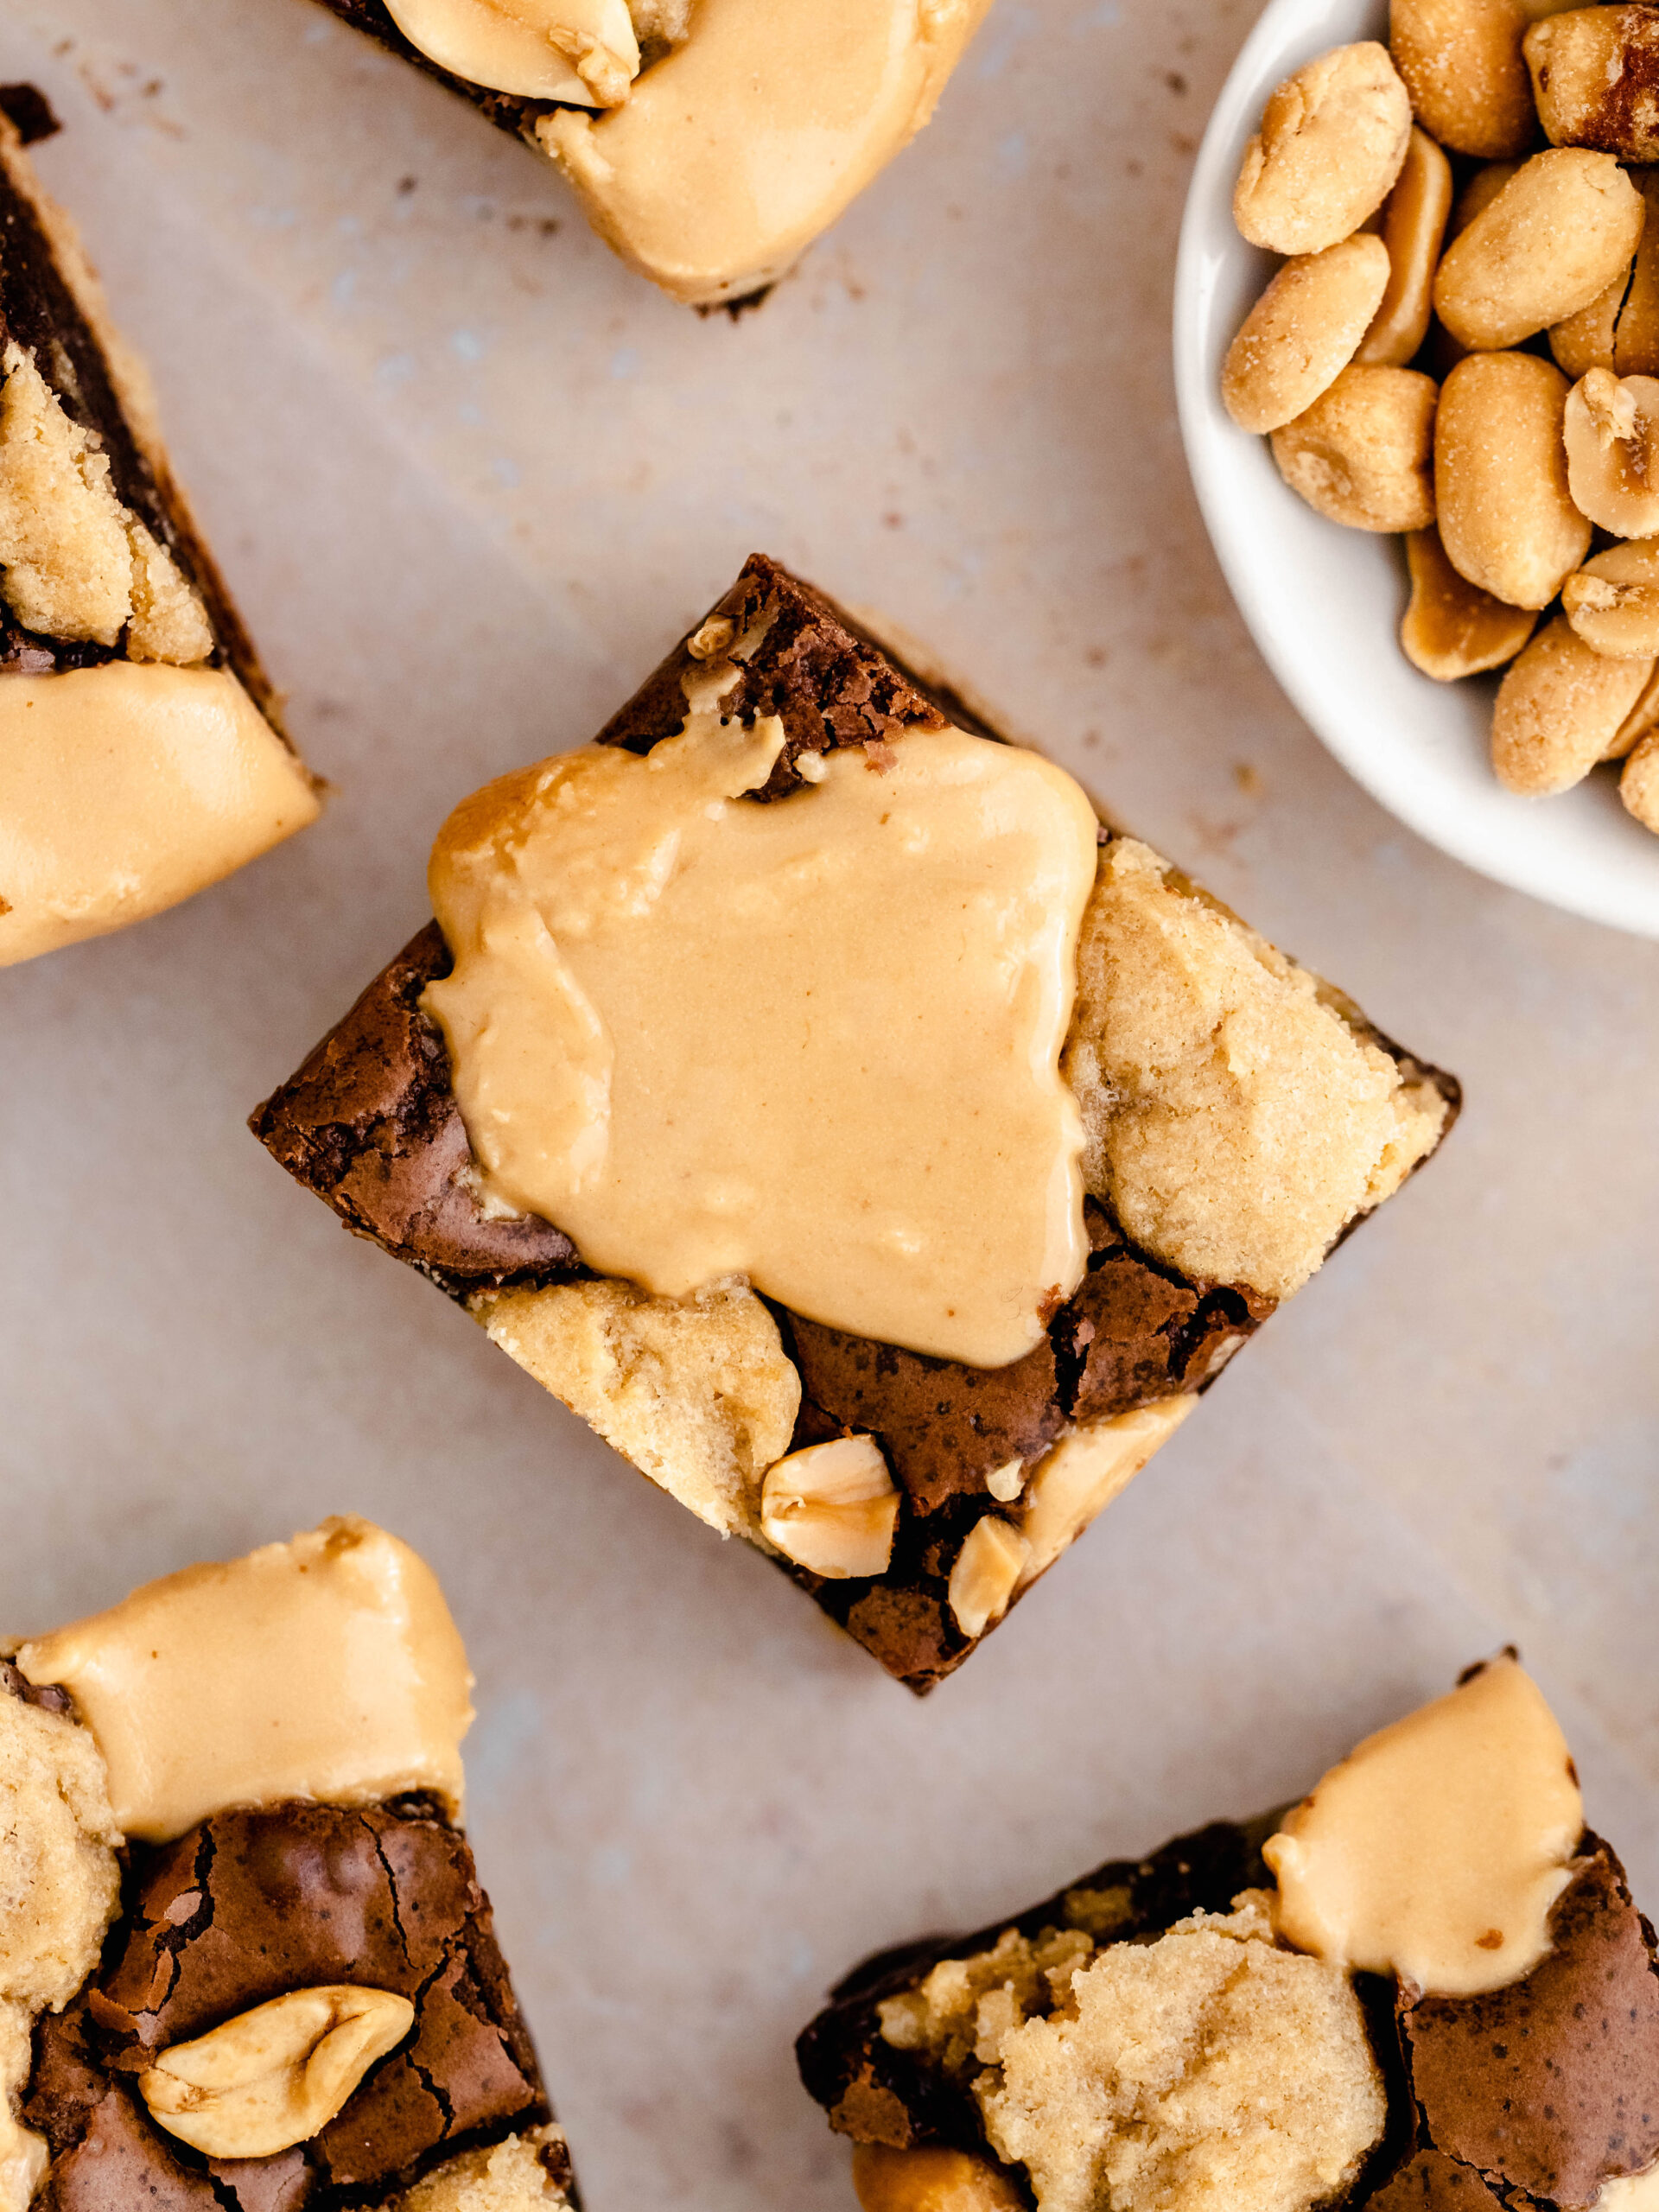 Slices of peanut butter brookie.